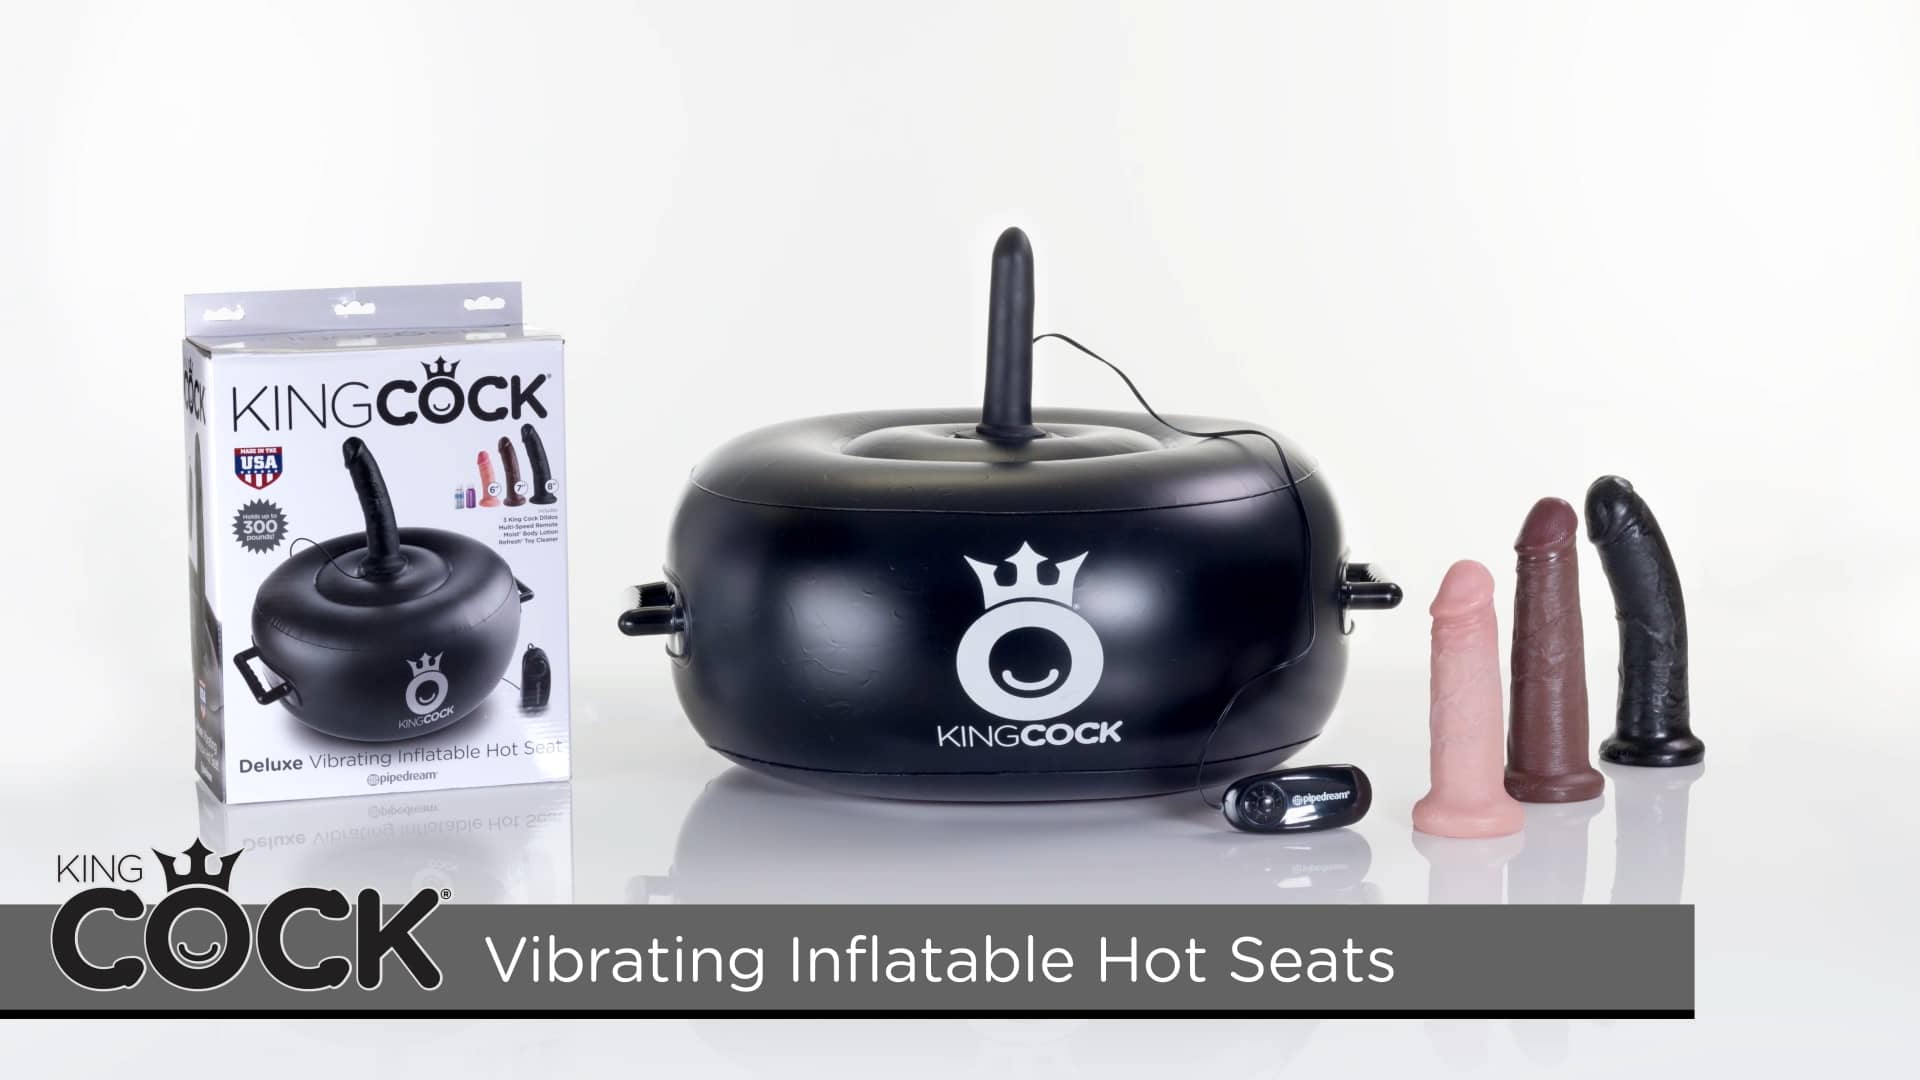 King Cocks Vibrator with Inflatable Hot Seat and double King Cock Attachments